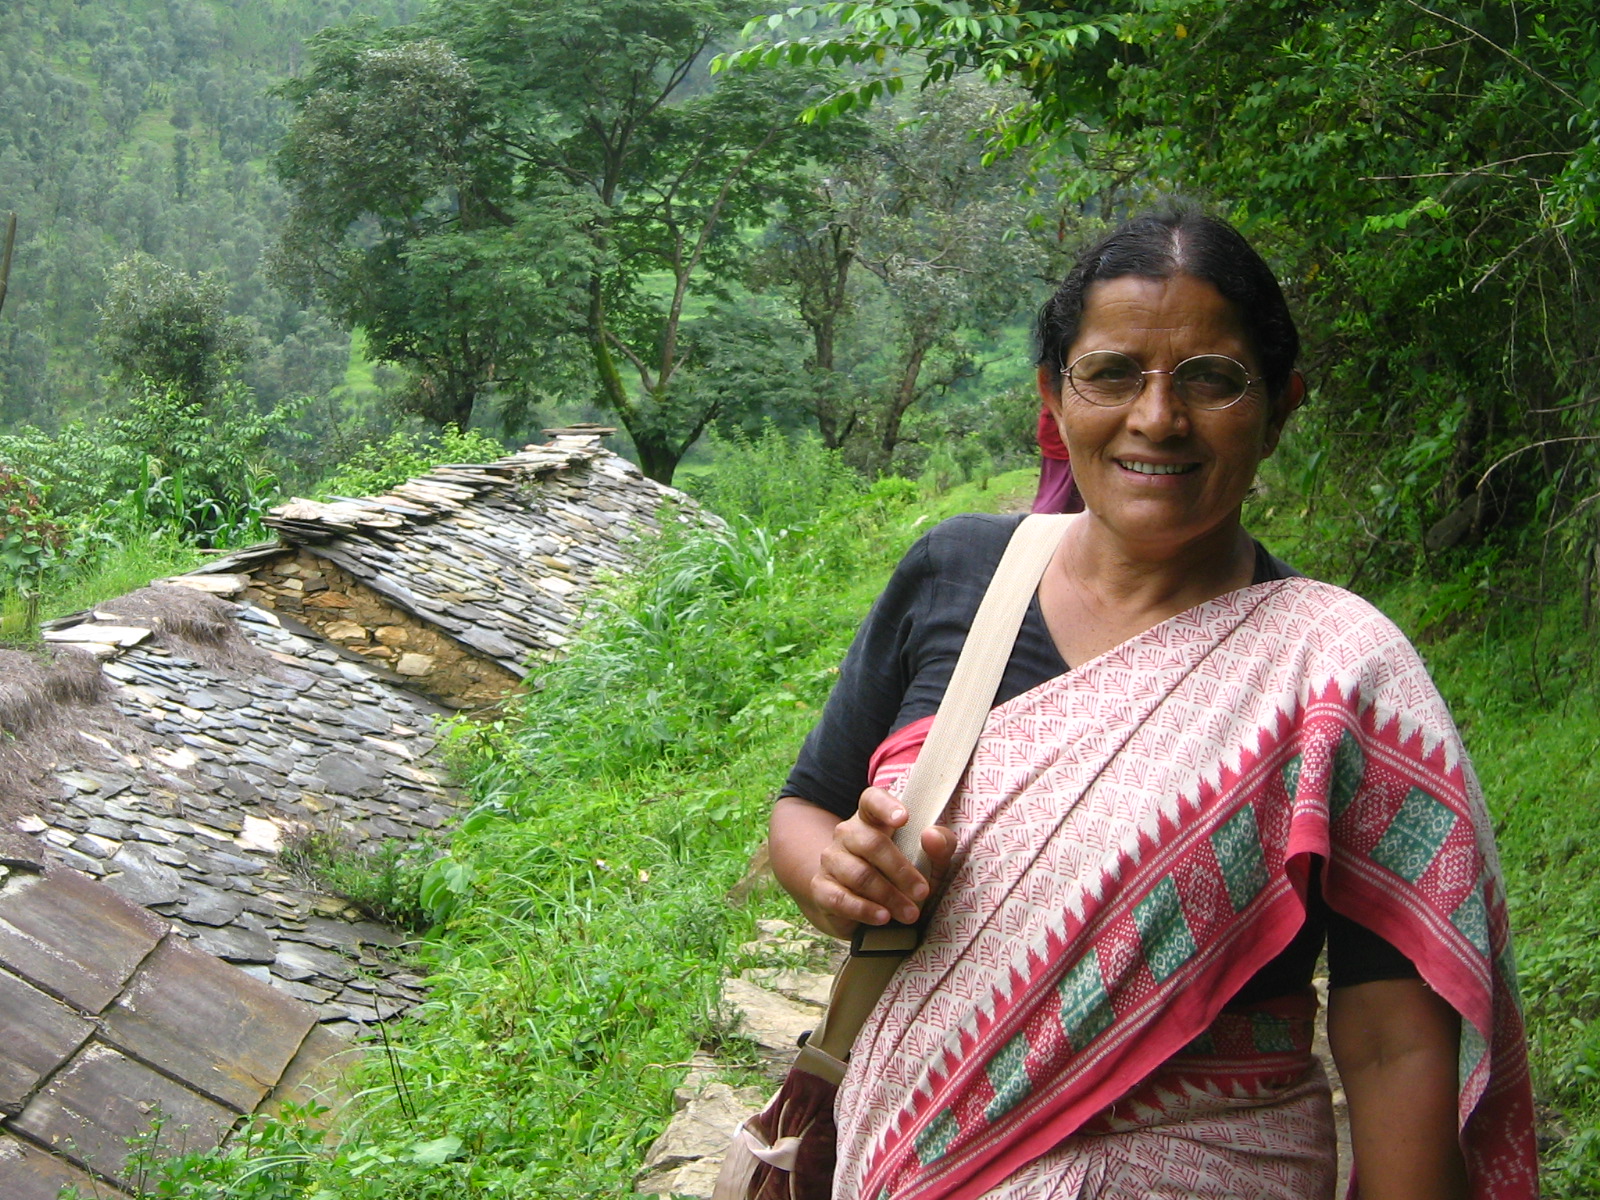 TBI Heroes: Basanti and the Kosi – How one woman revitalized a watershed